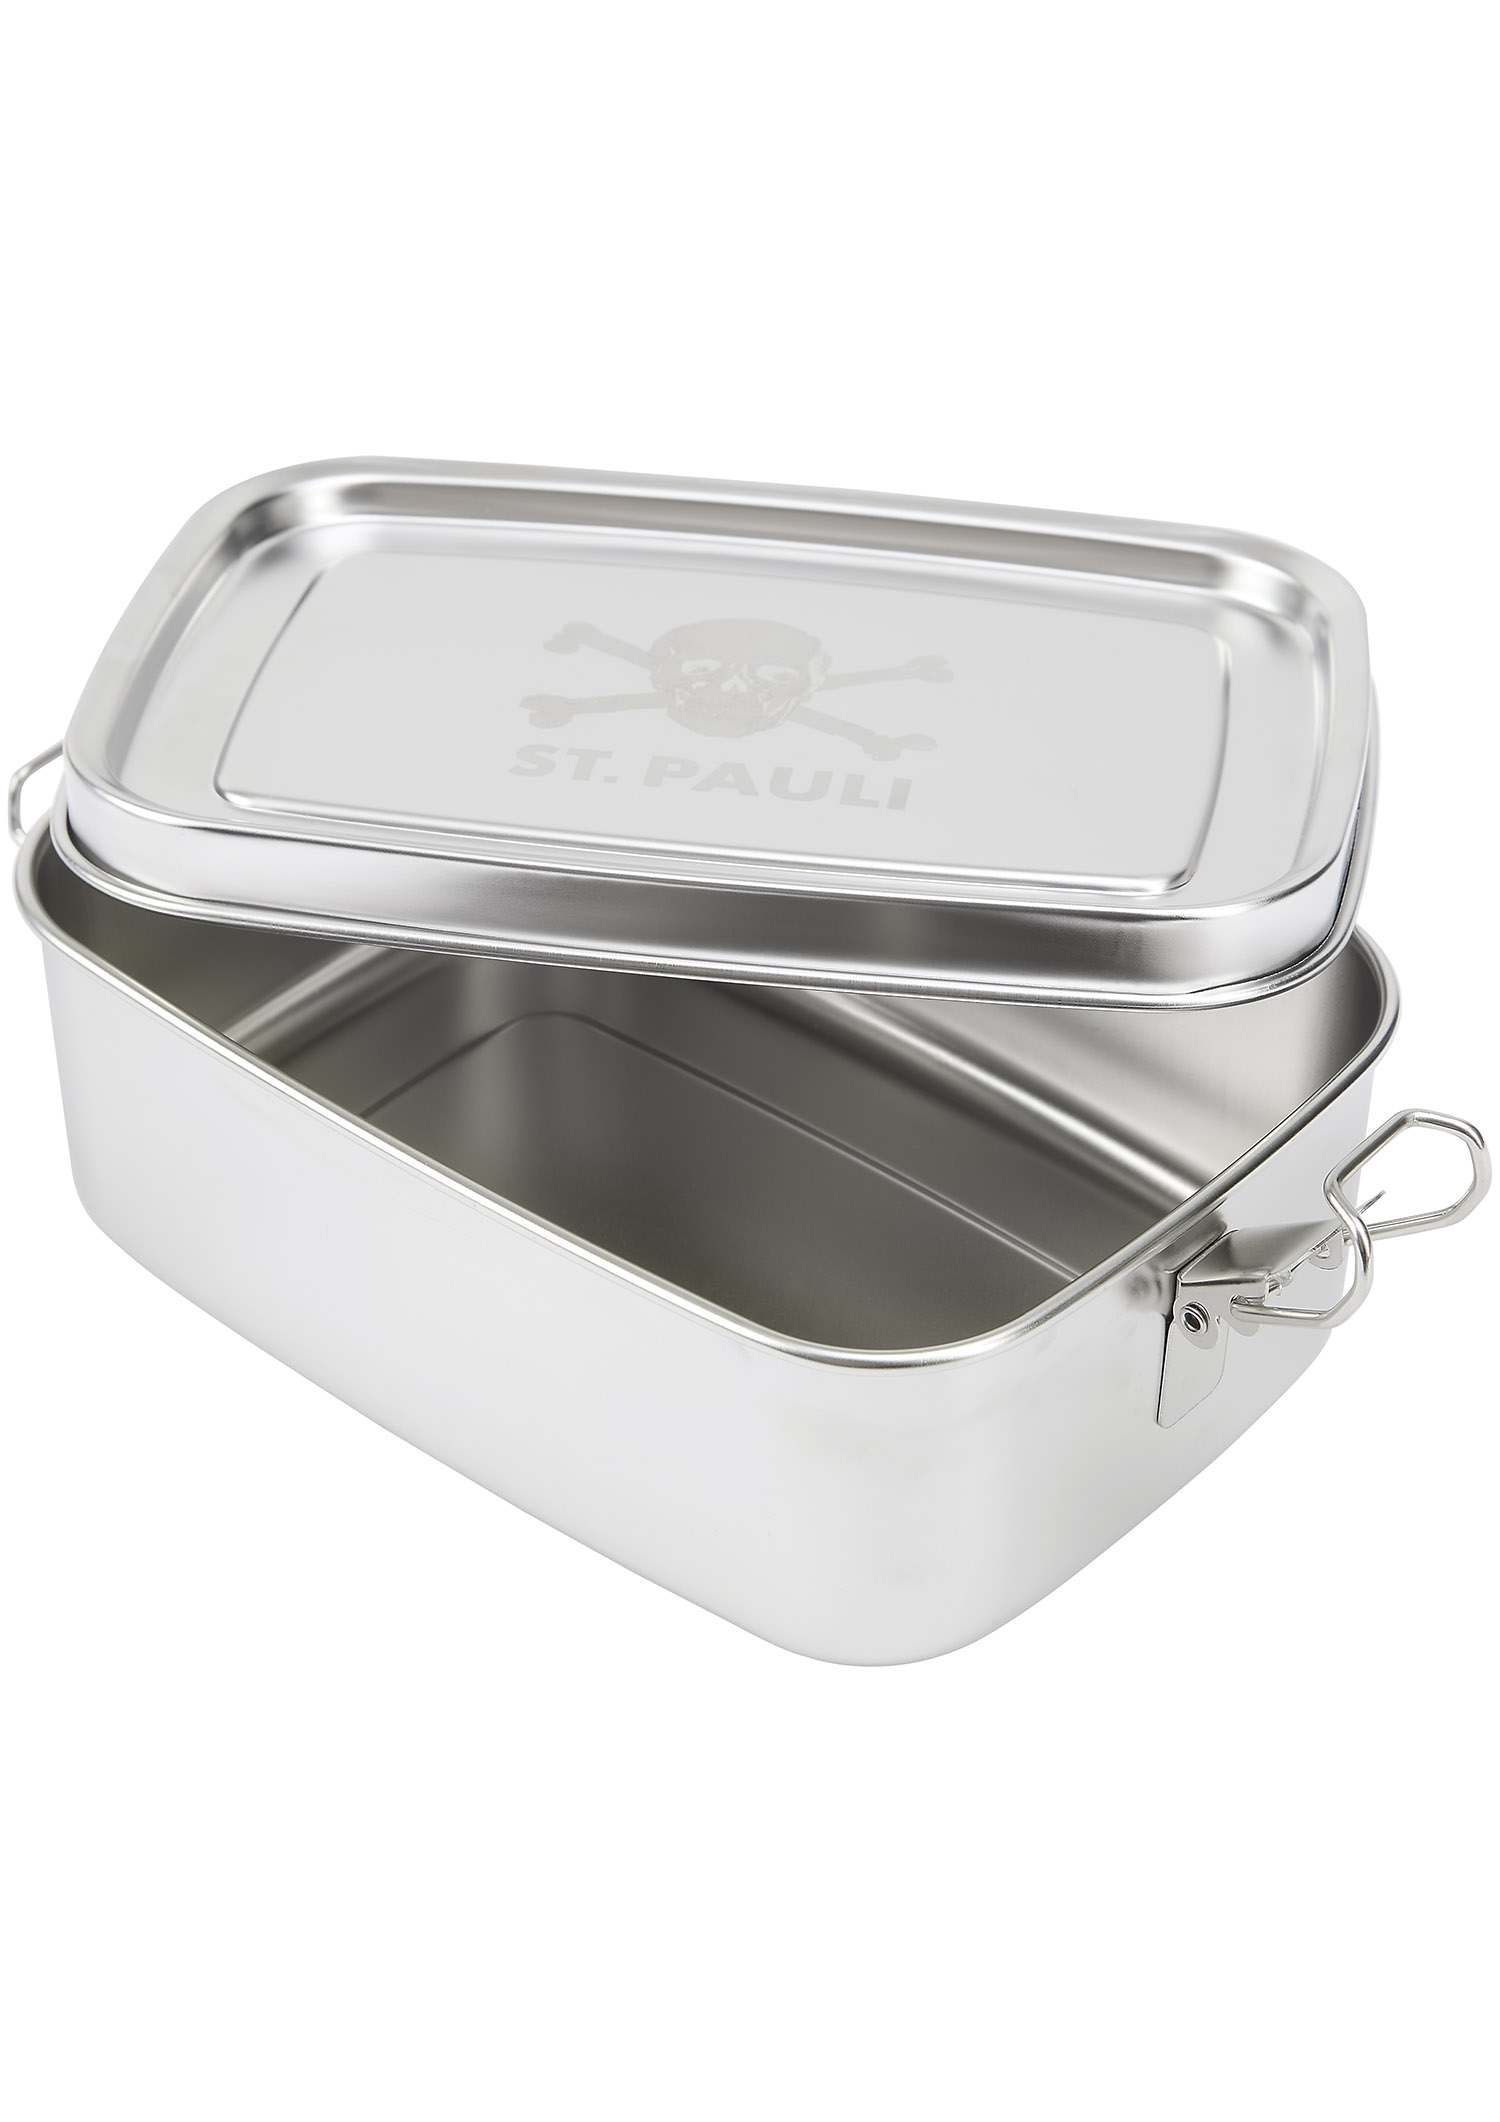 Lunchbox Stainless Steel "Skull and Crossbones"